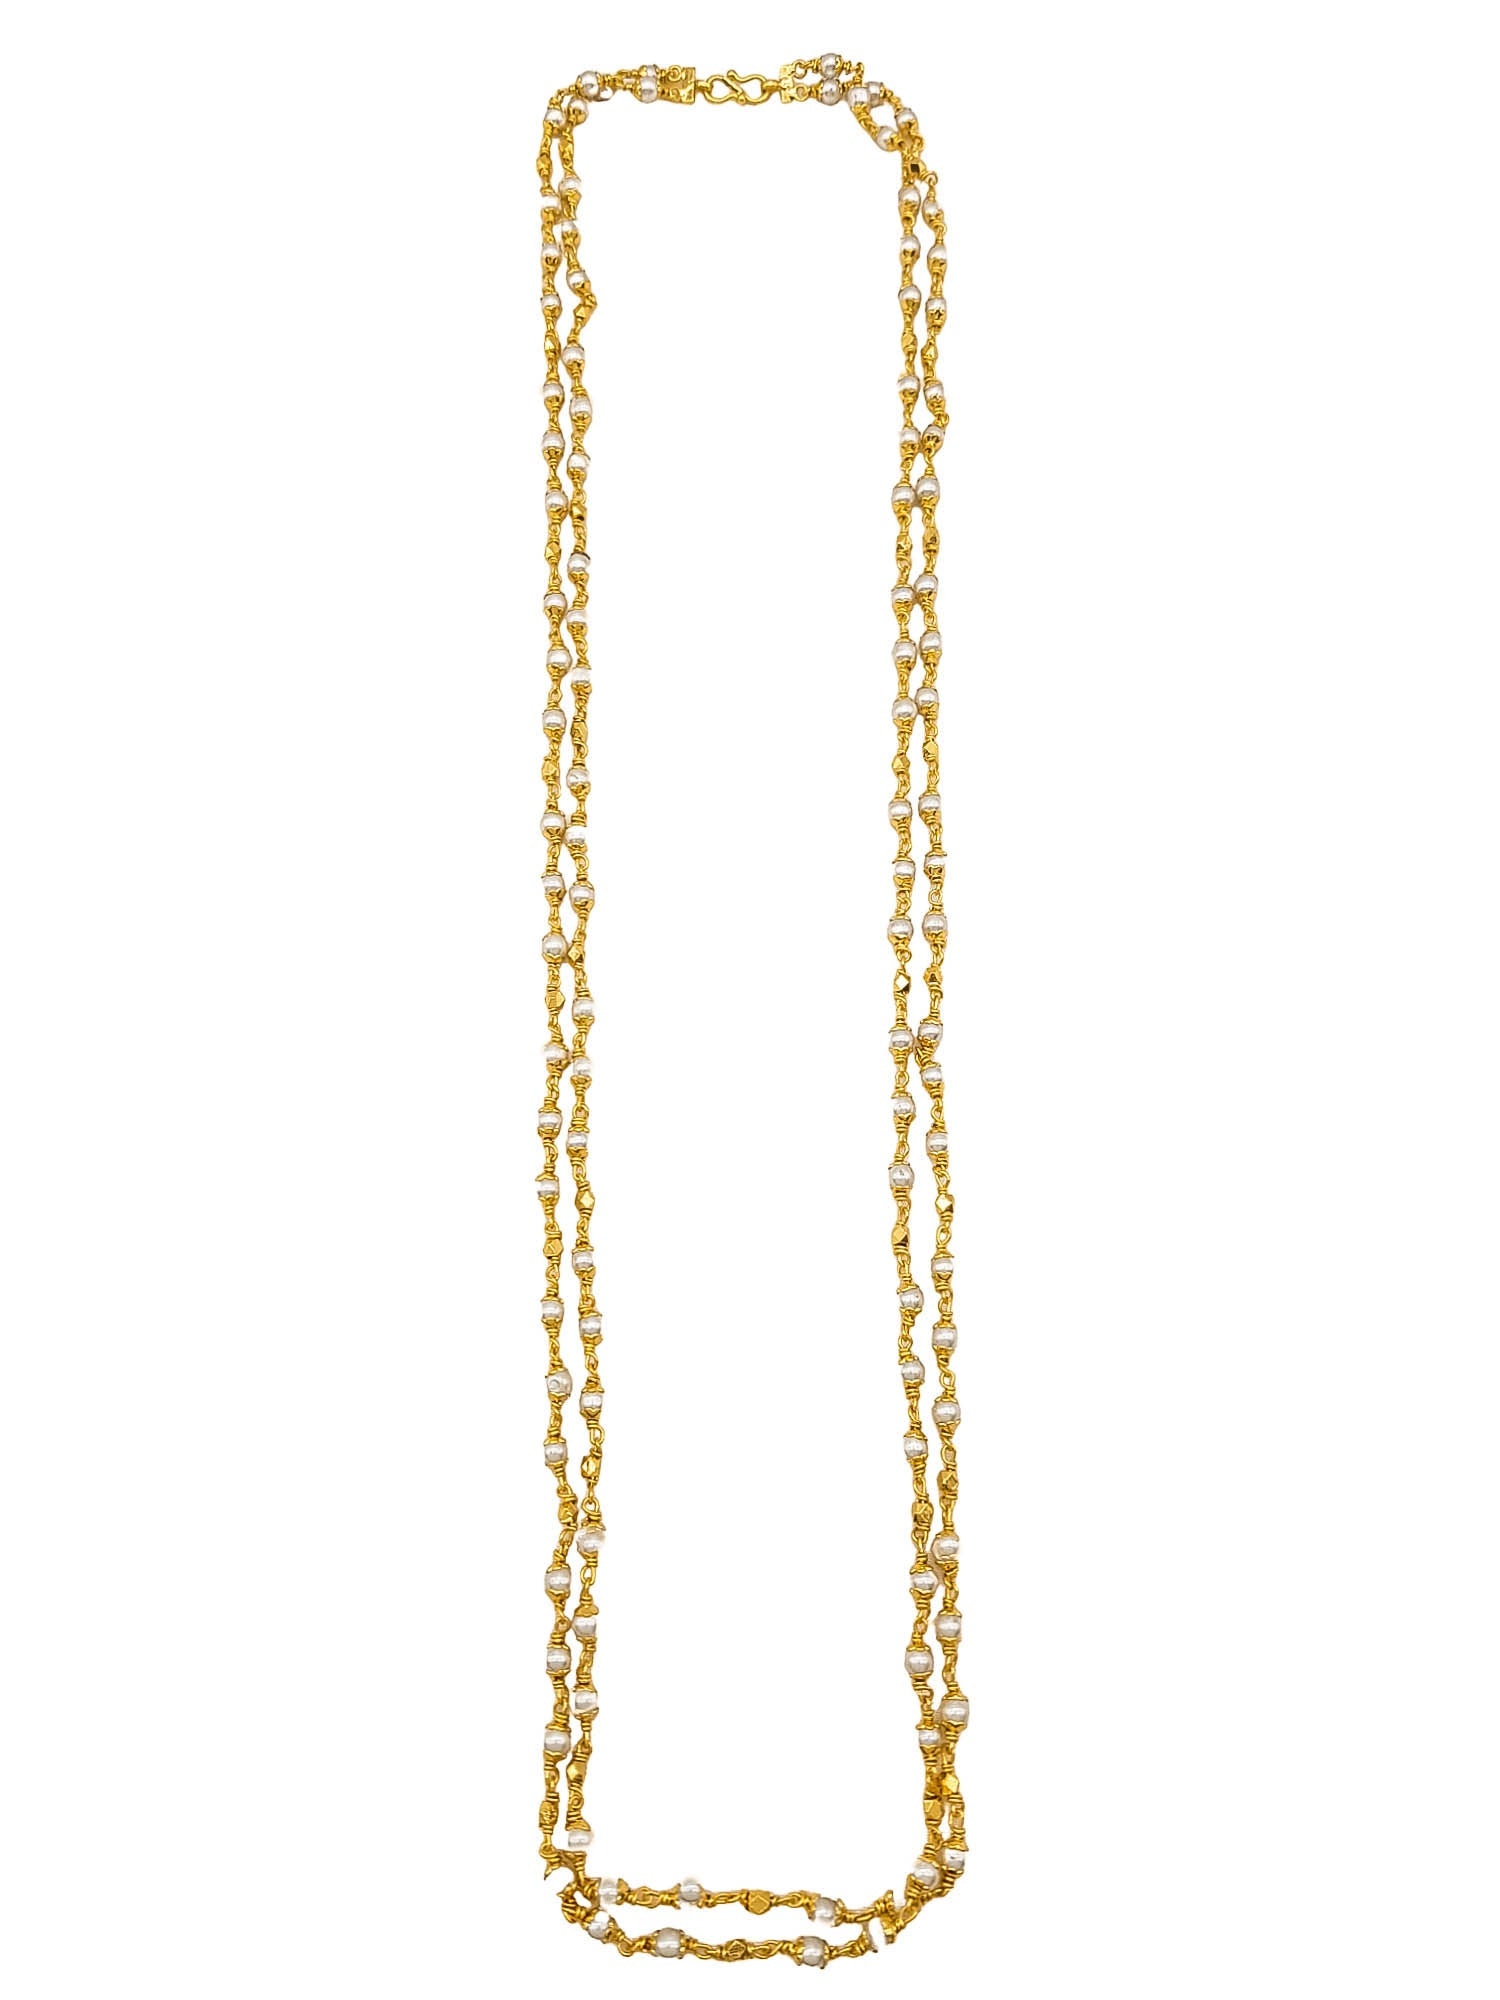 24k Gold Plated Beads chain